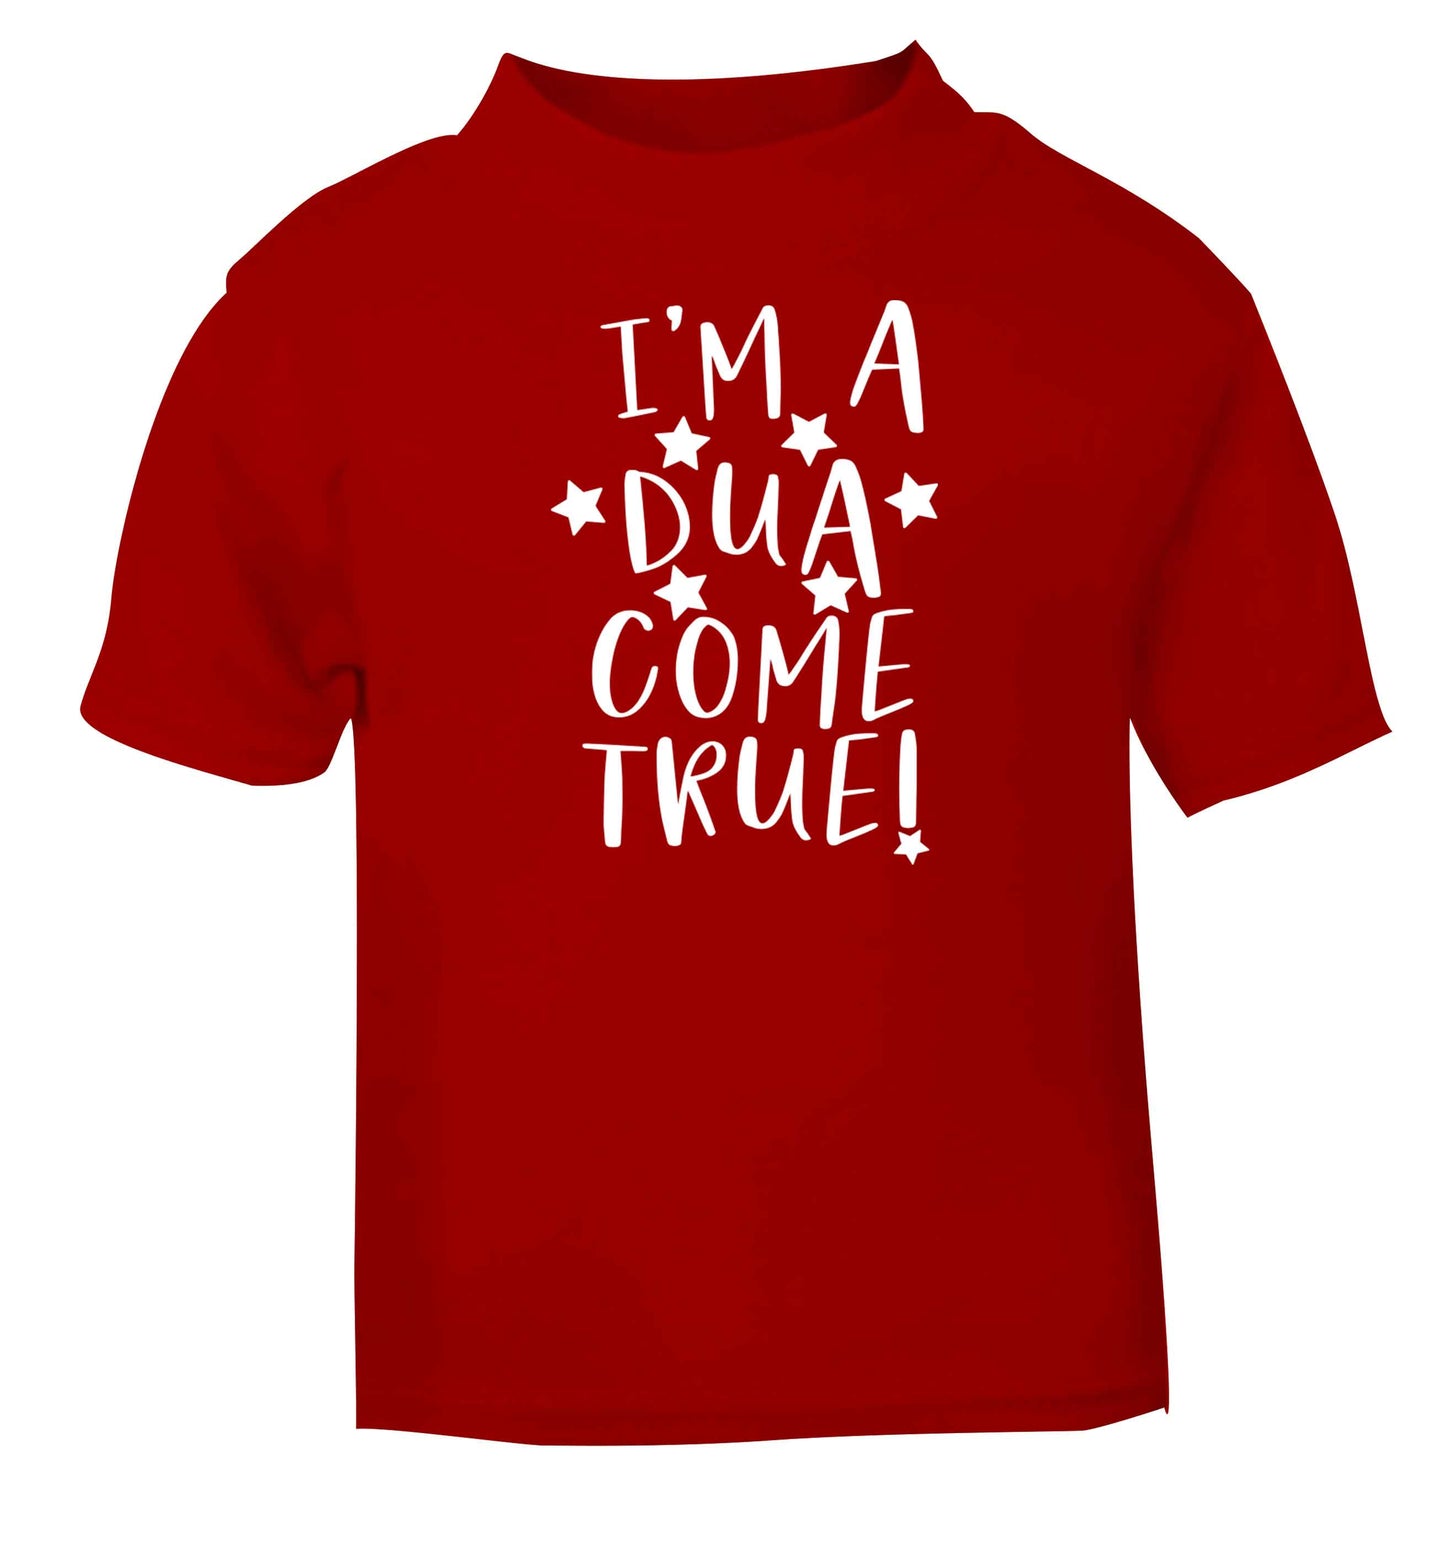 I'm a dua come true red baby toddler Tshirt 2 Years